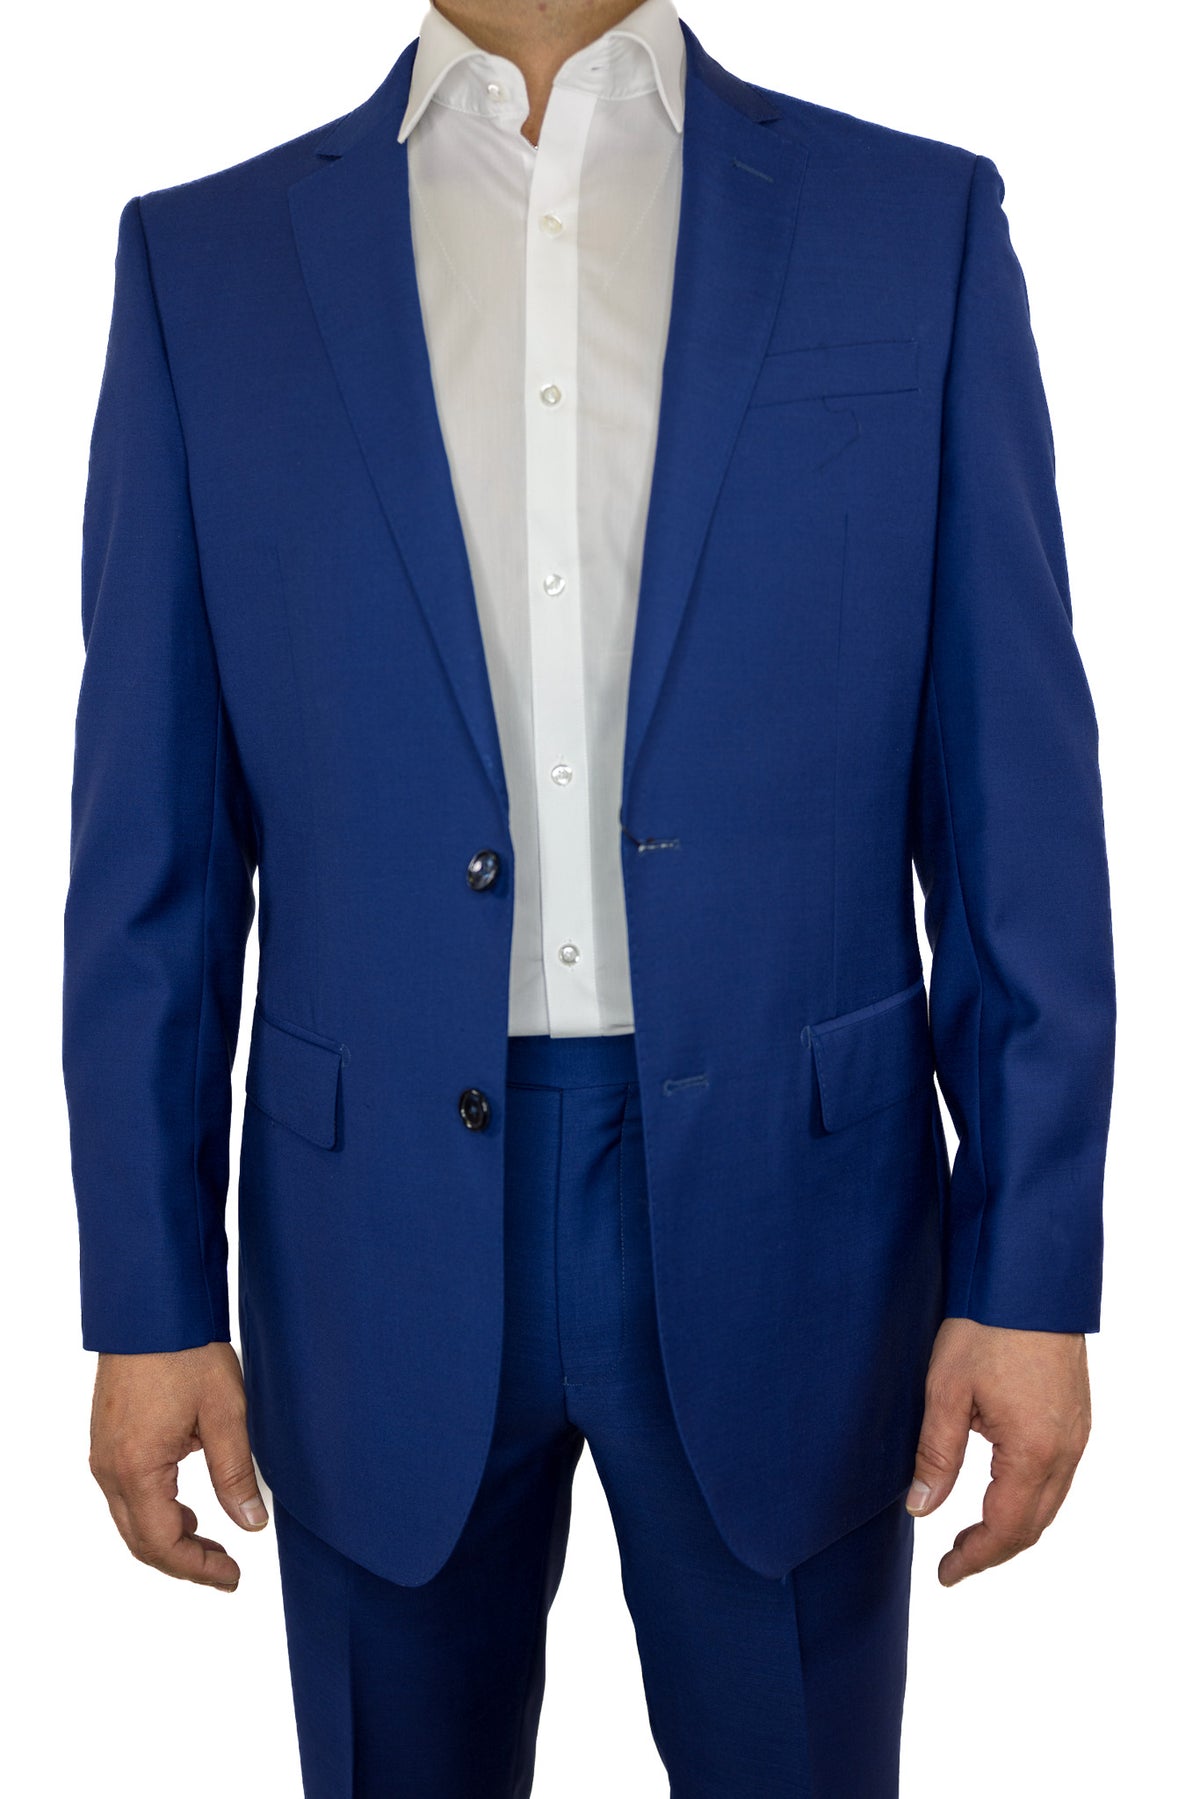 Tiglio Lux Slim Fit Suit French Blue